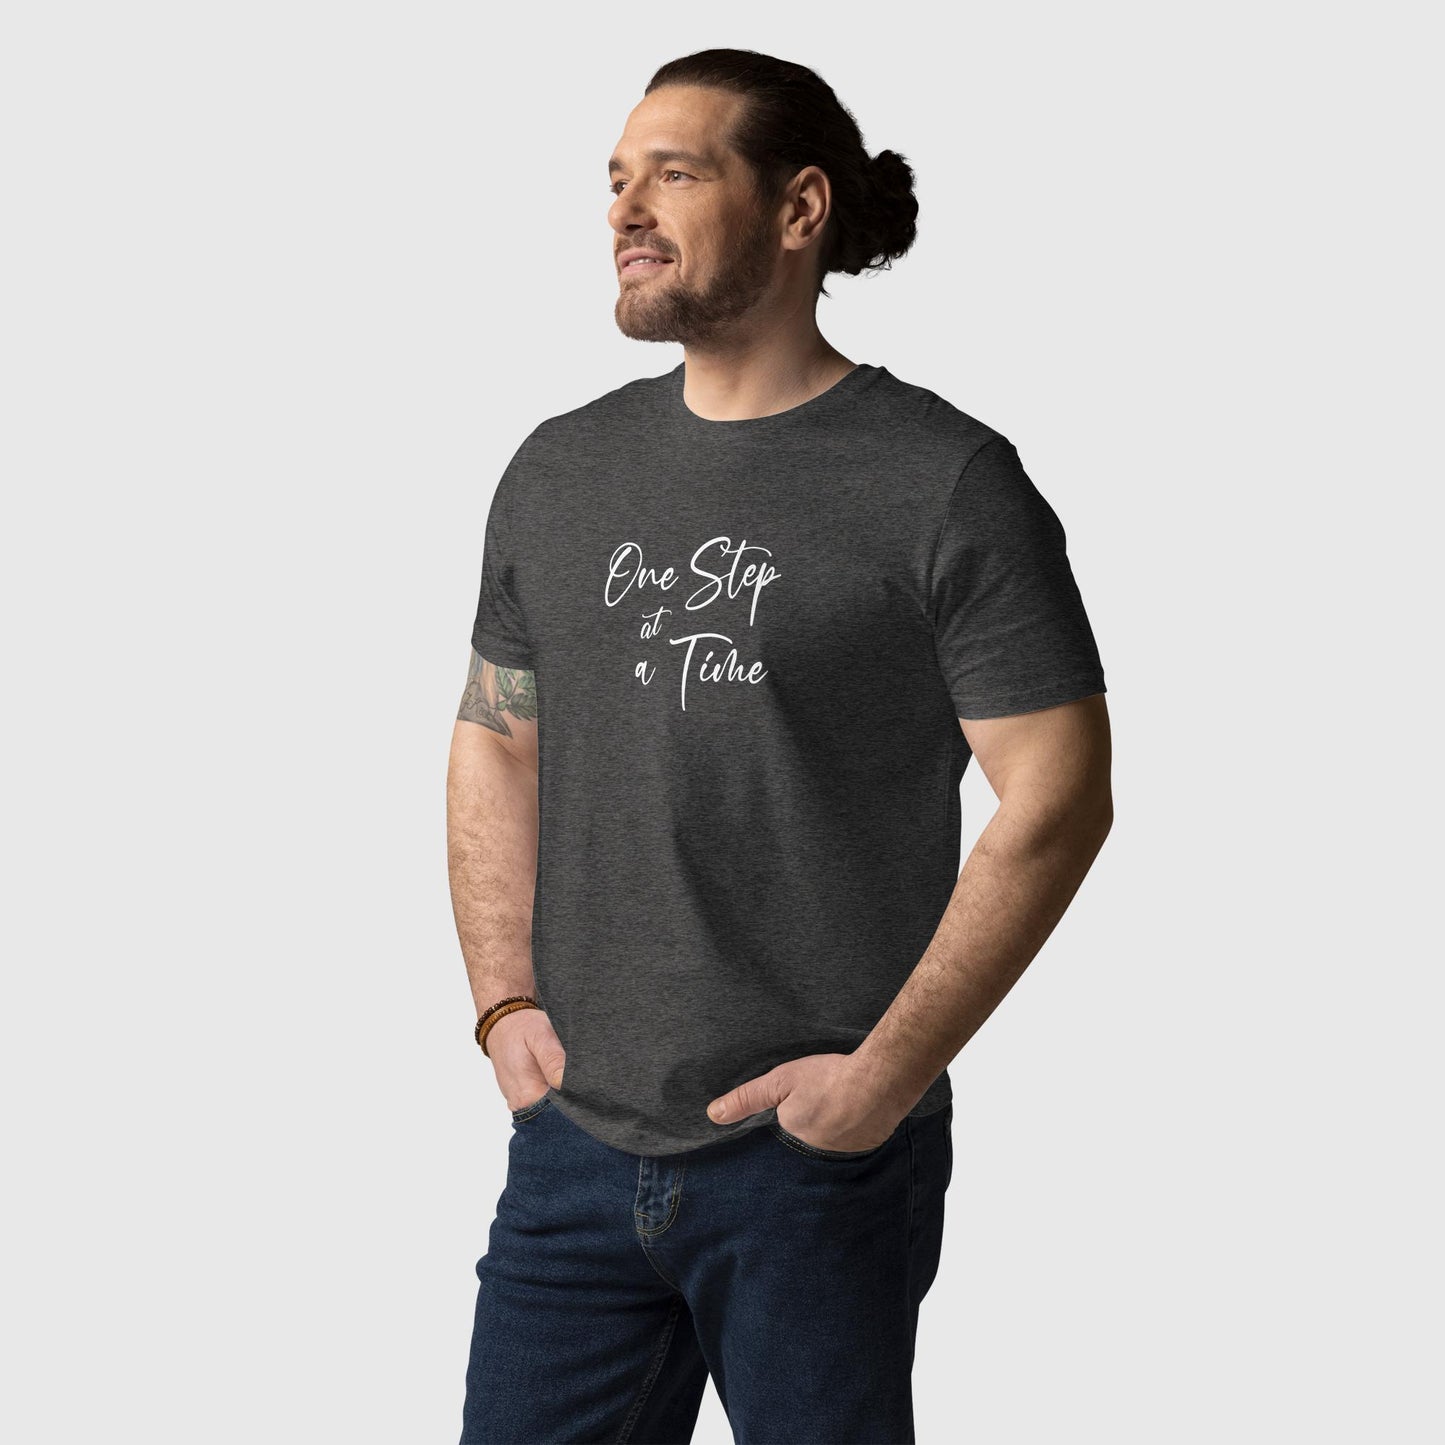 Men's dark heather gray organic cotton t-shirt that features the positive saying, "One Step At A Time."